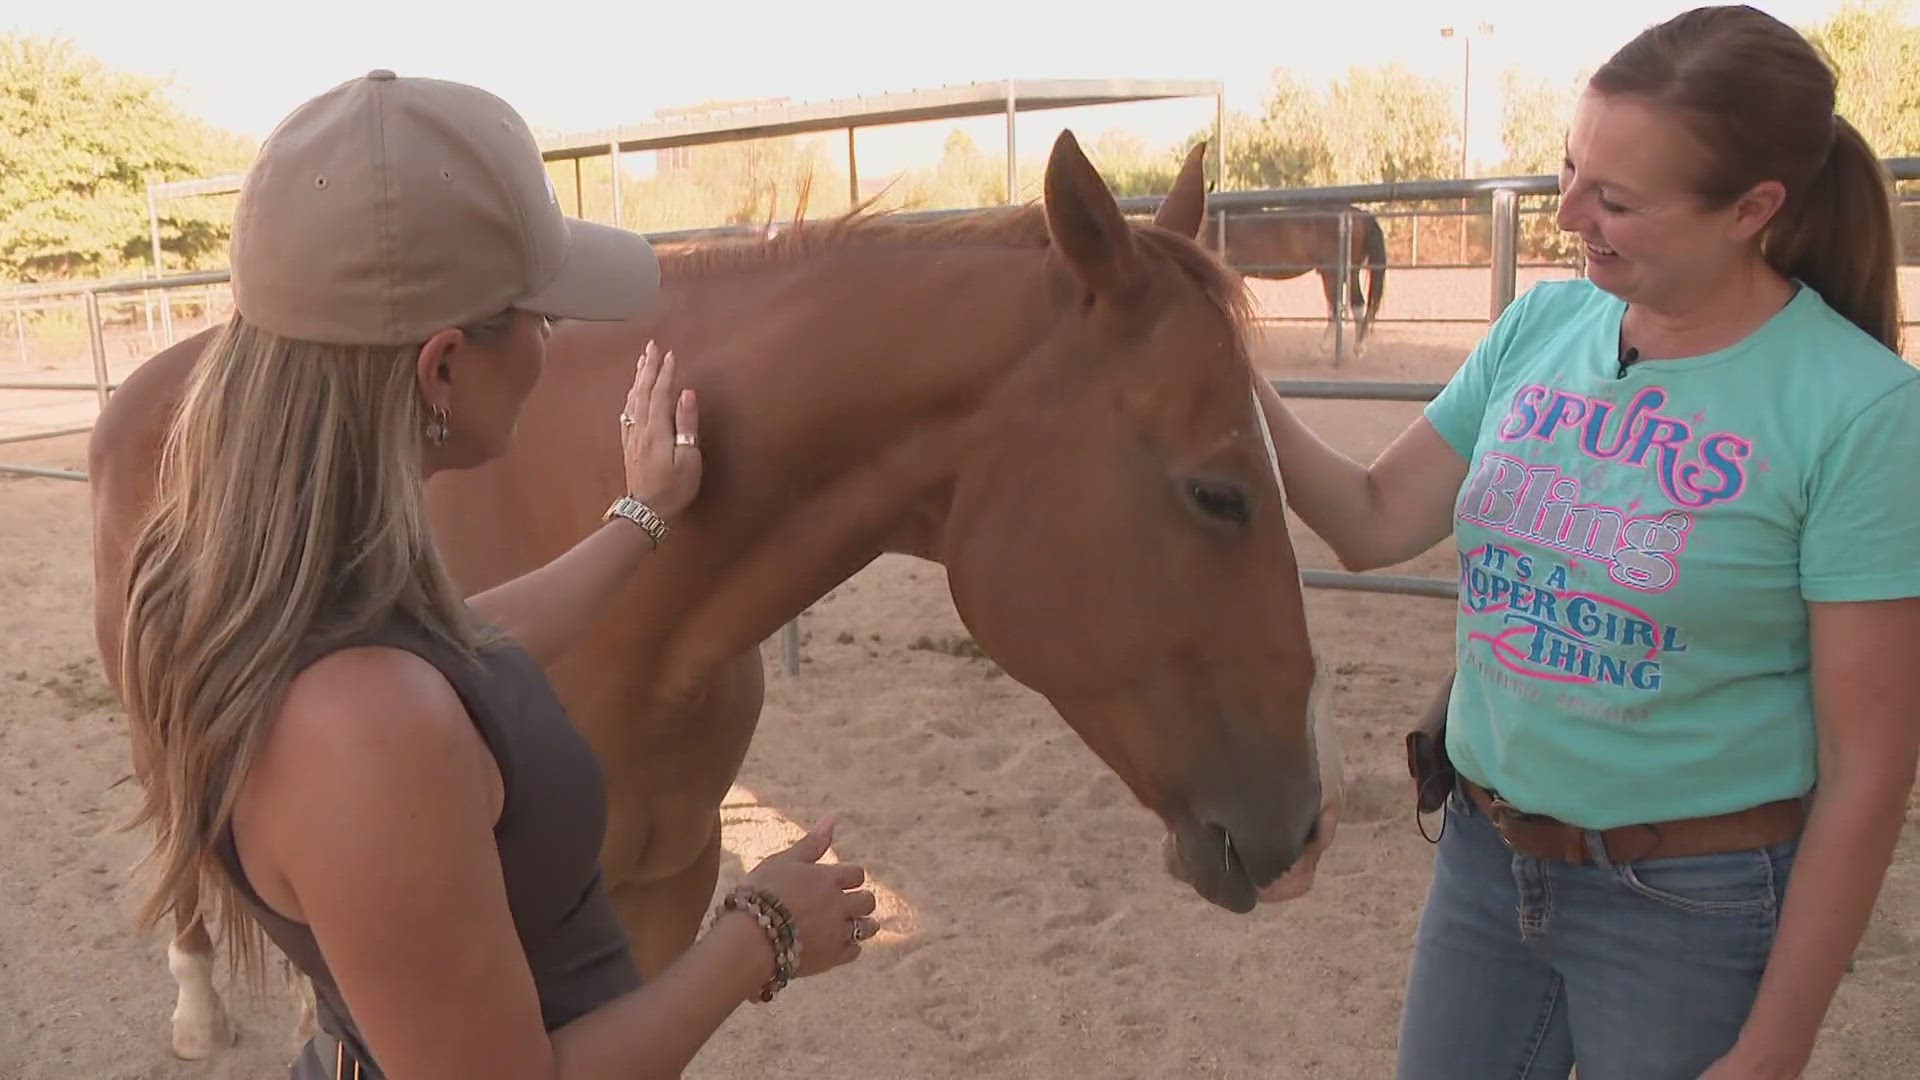 The fast-moving flames sparked fear in the 28 horses at the Almosta Ranch.